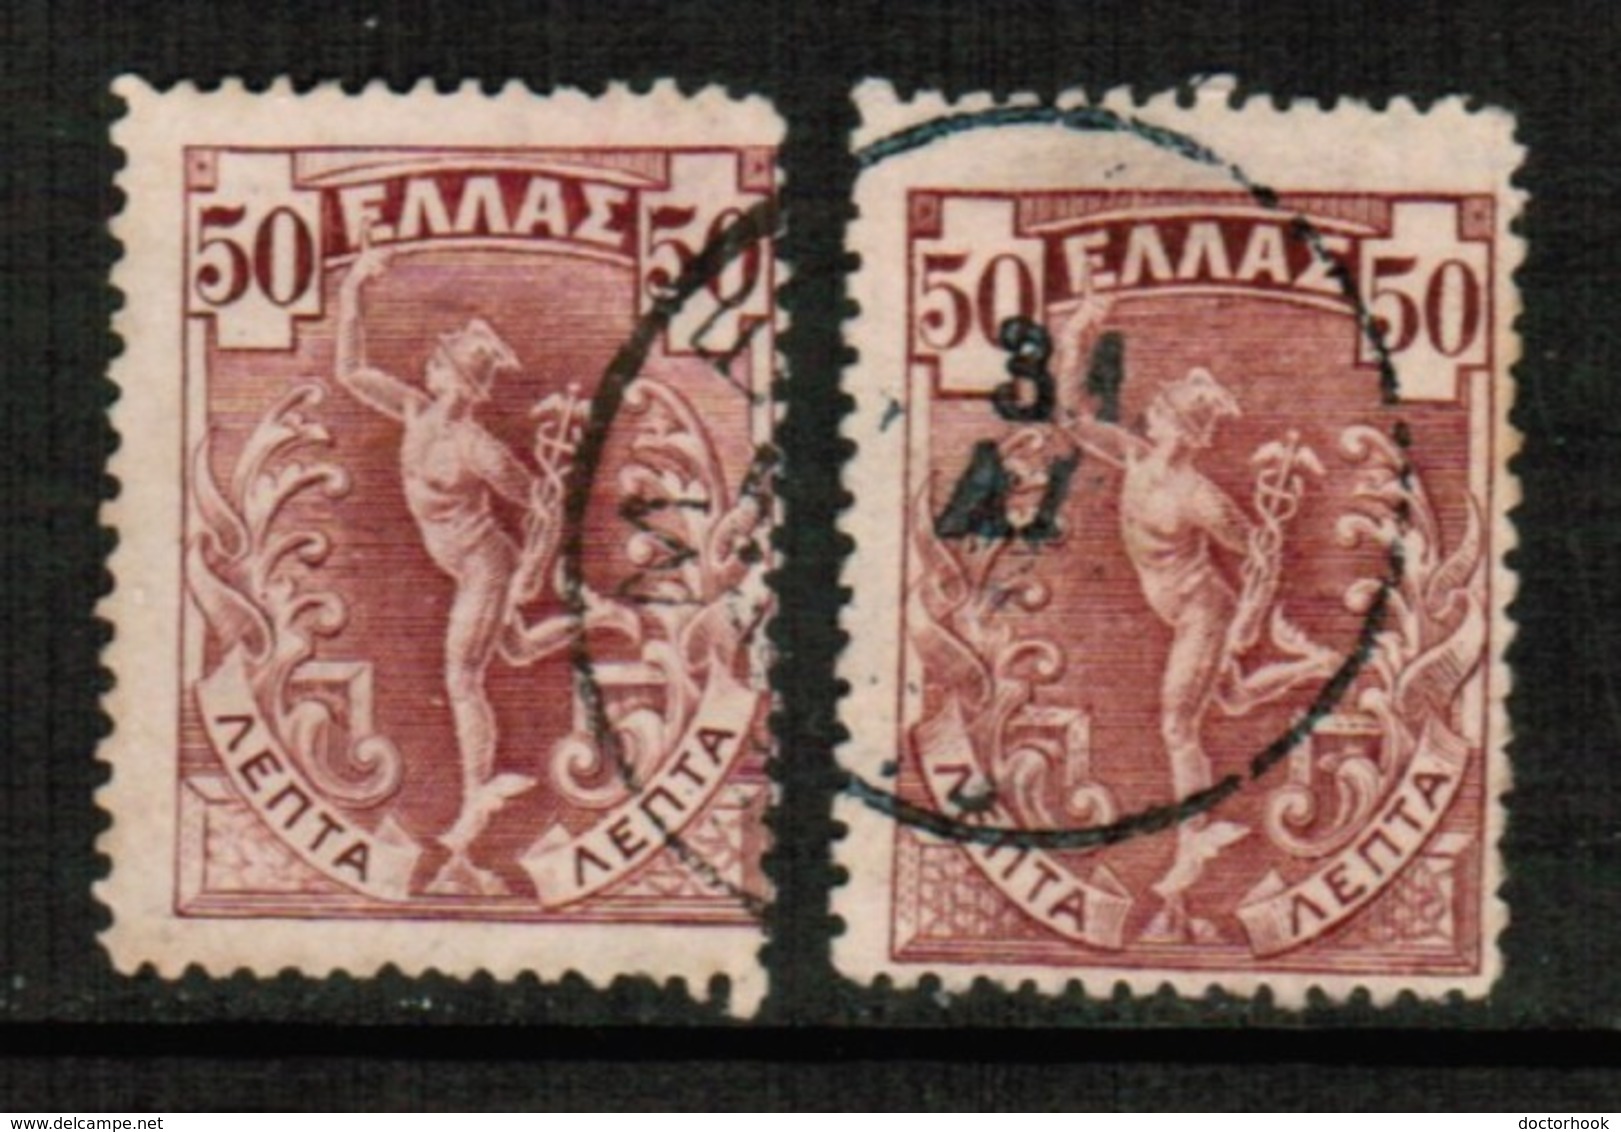 GREECE   Scott # 174 F-VF USED BOTH THICK & THIN PAPER VARIETIES (Stamp Scan # 563) - Used Stamps